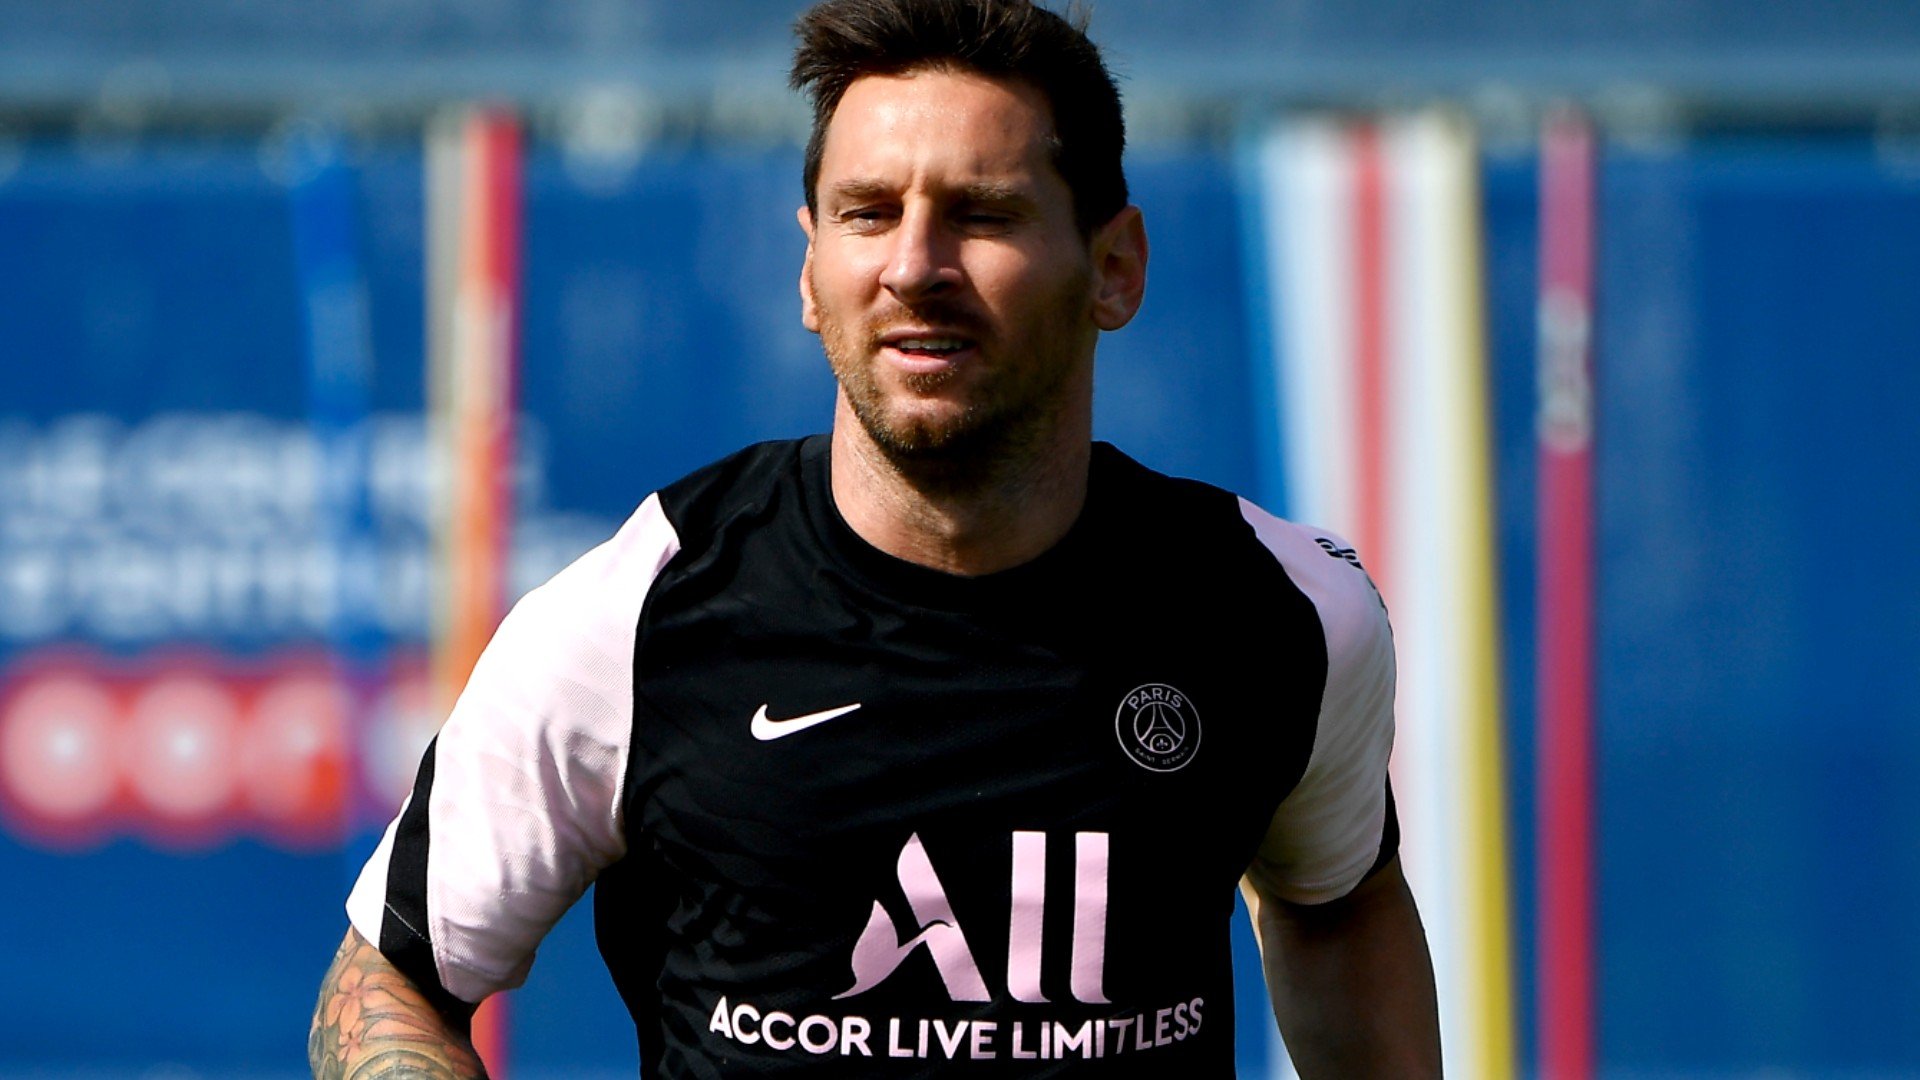 Lionel Messi: Date PSG star will make his debut revealed Post Nigeria